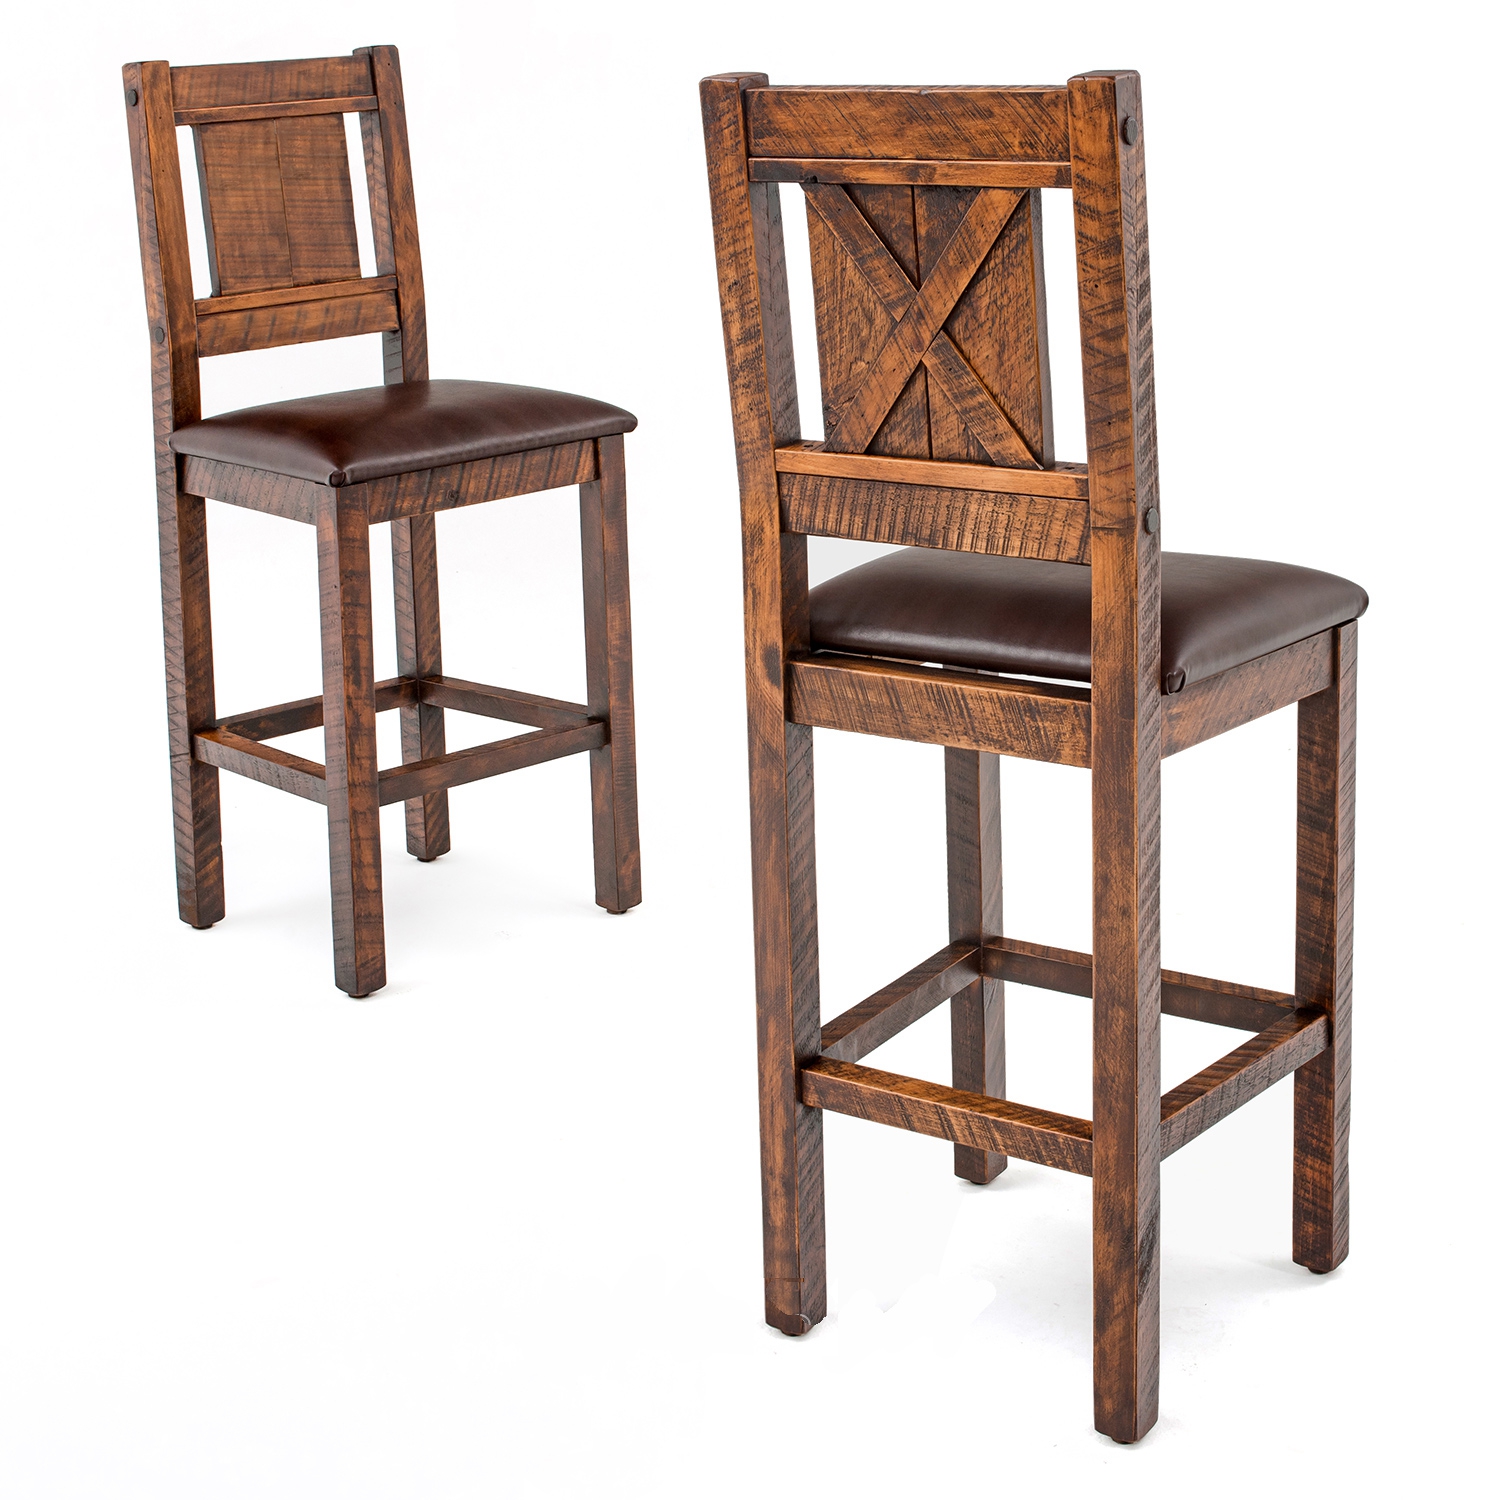 Image of Western Winds Weathered Wood Rustic Bar Stool